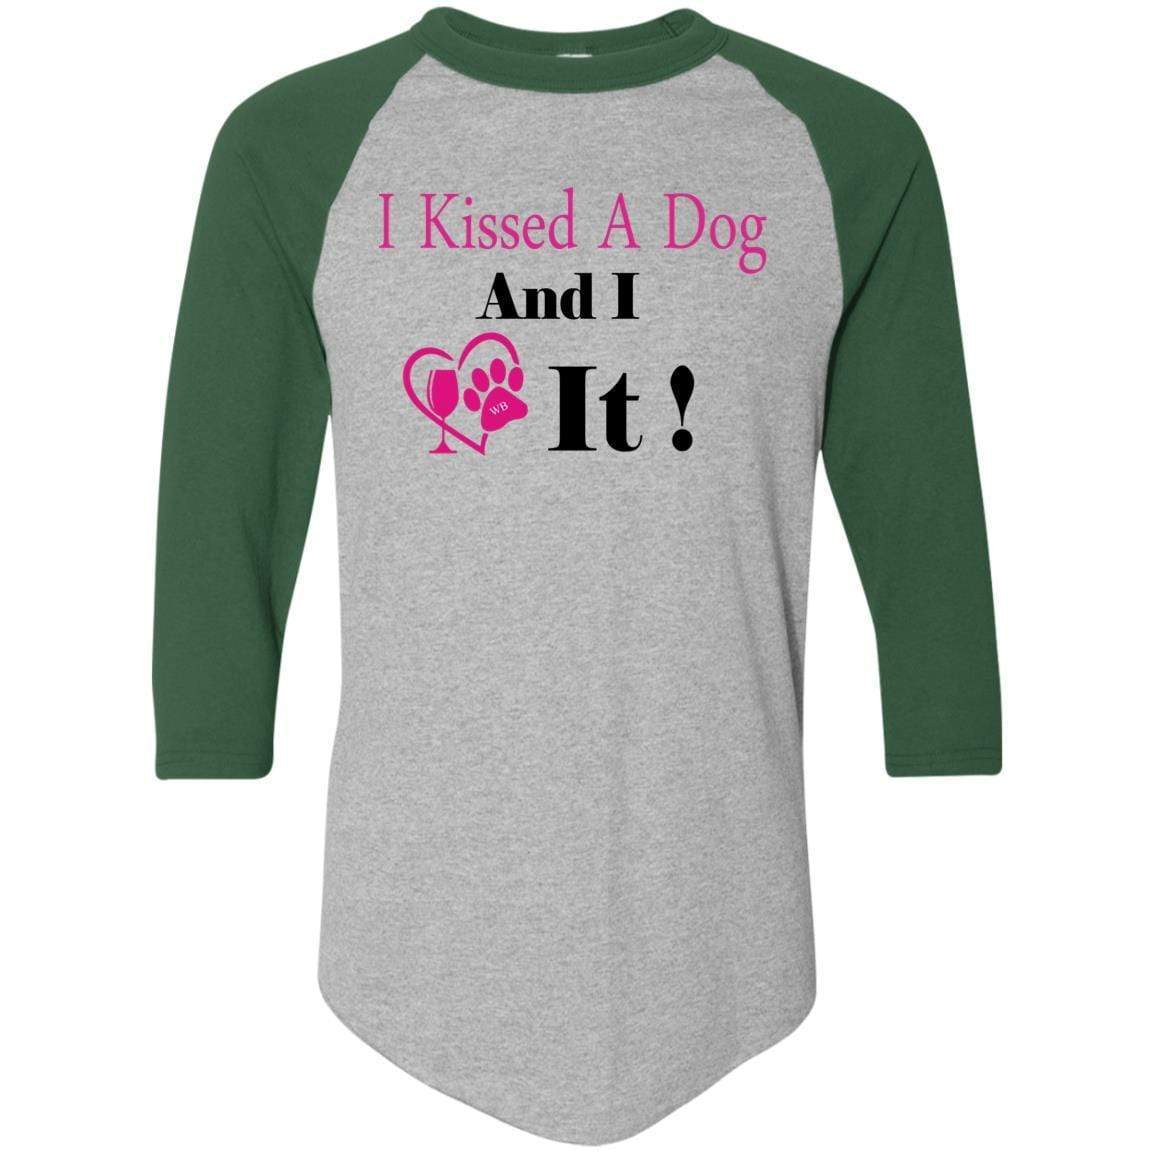 T-Shirts Athletic Heather/Dark Green / S WineyBitches.co "I Kissed A Dog And I Loved It:" Colorblock Raglan Jersey WineyBitchesCo